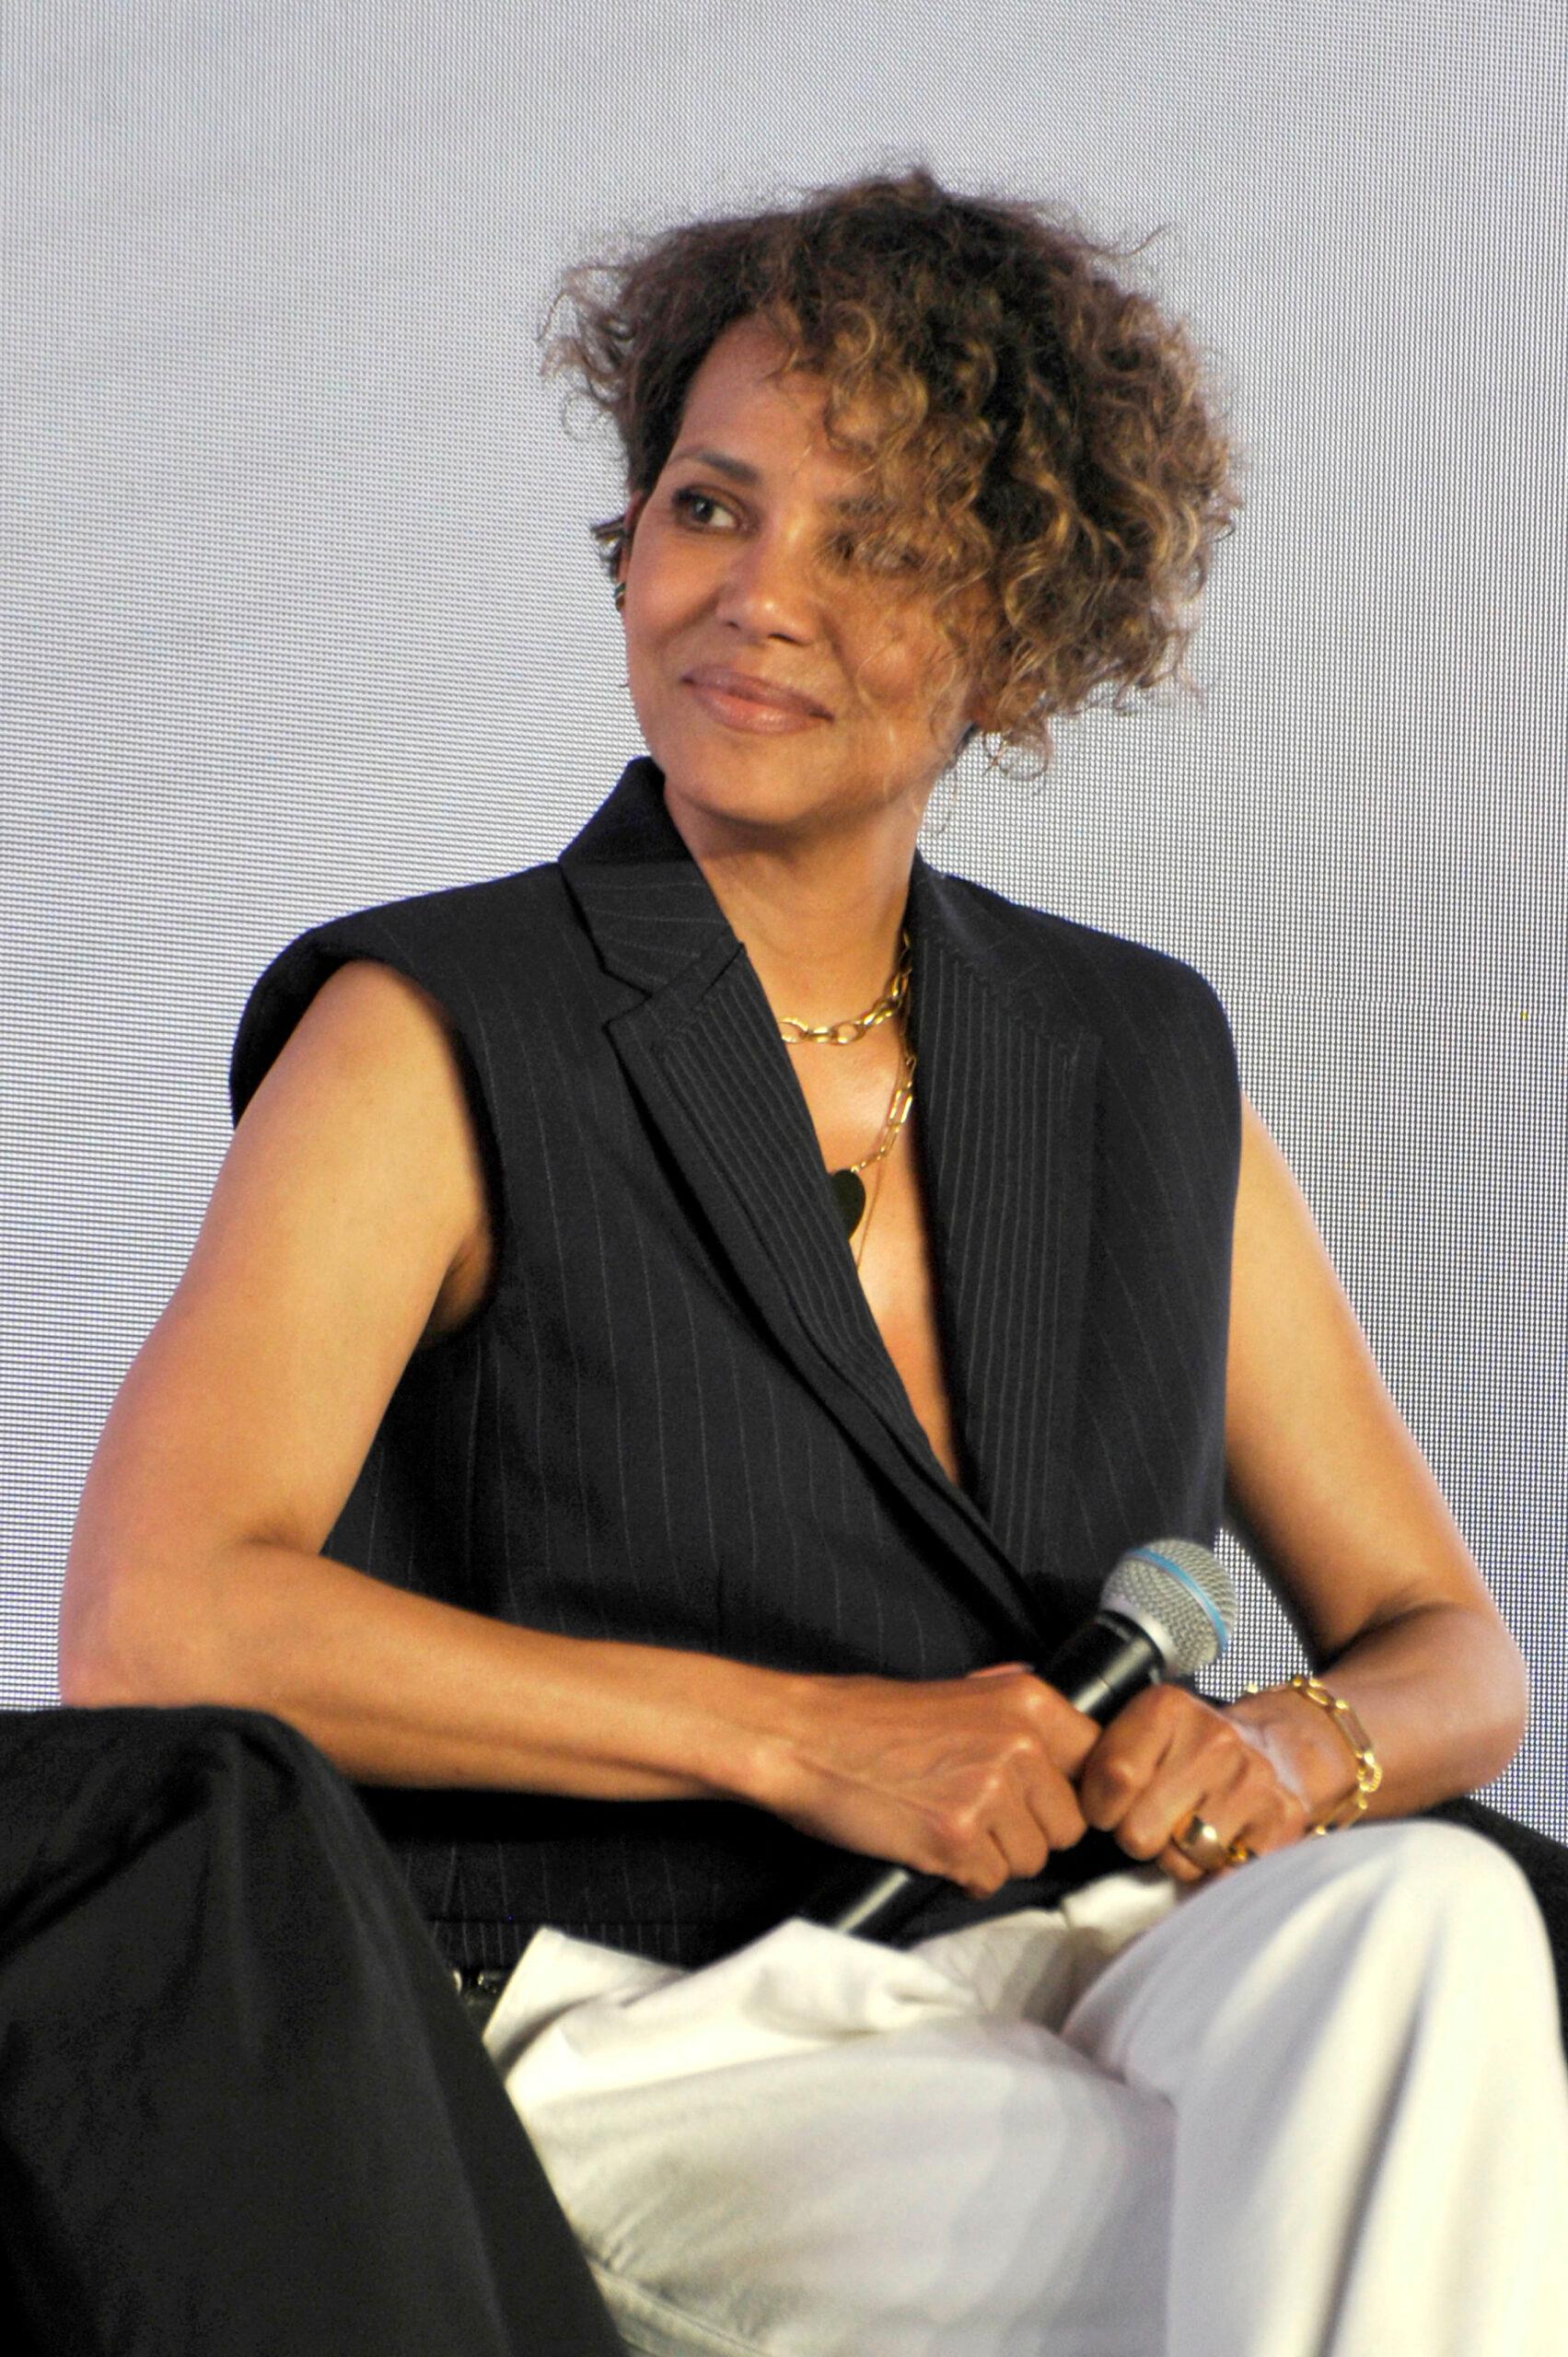 Halle Berry speaks at Cannes Lions